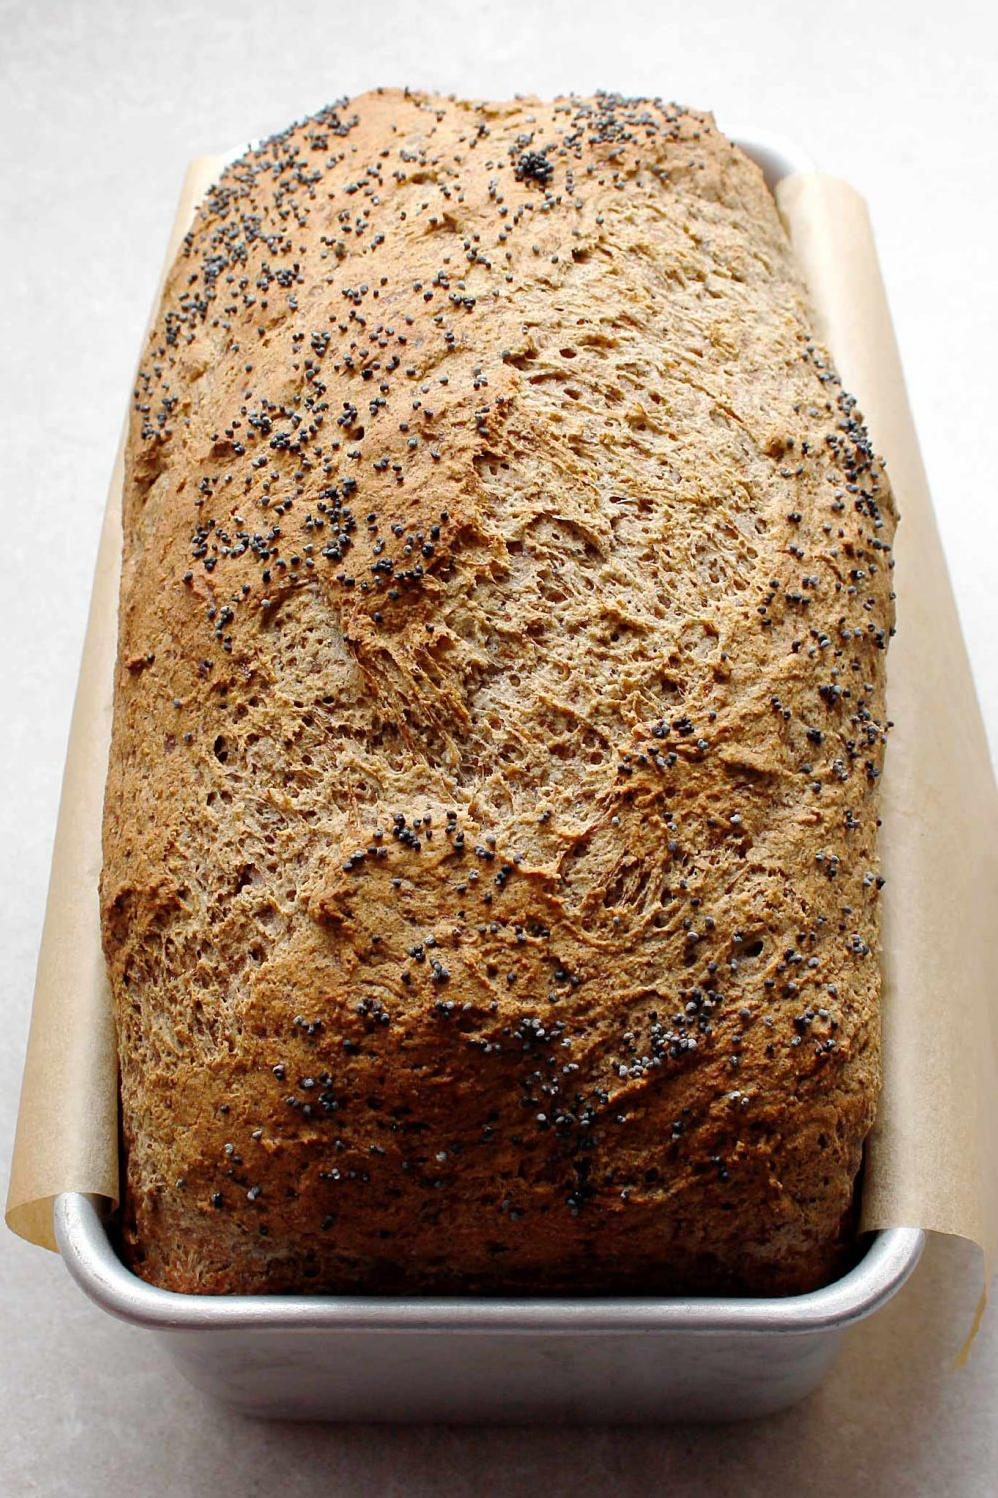  This bread is packed with essential nutrients to fuel your body.